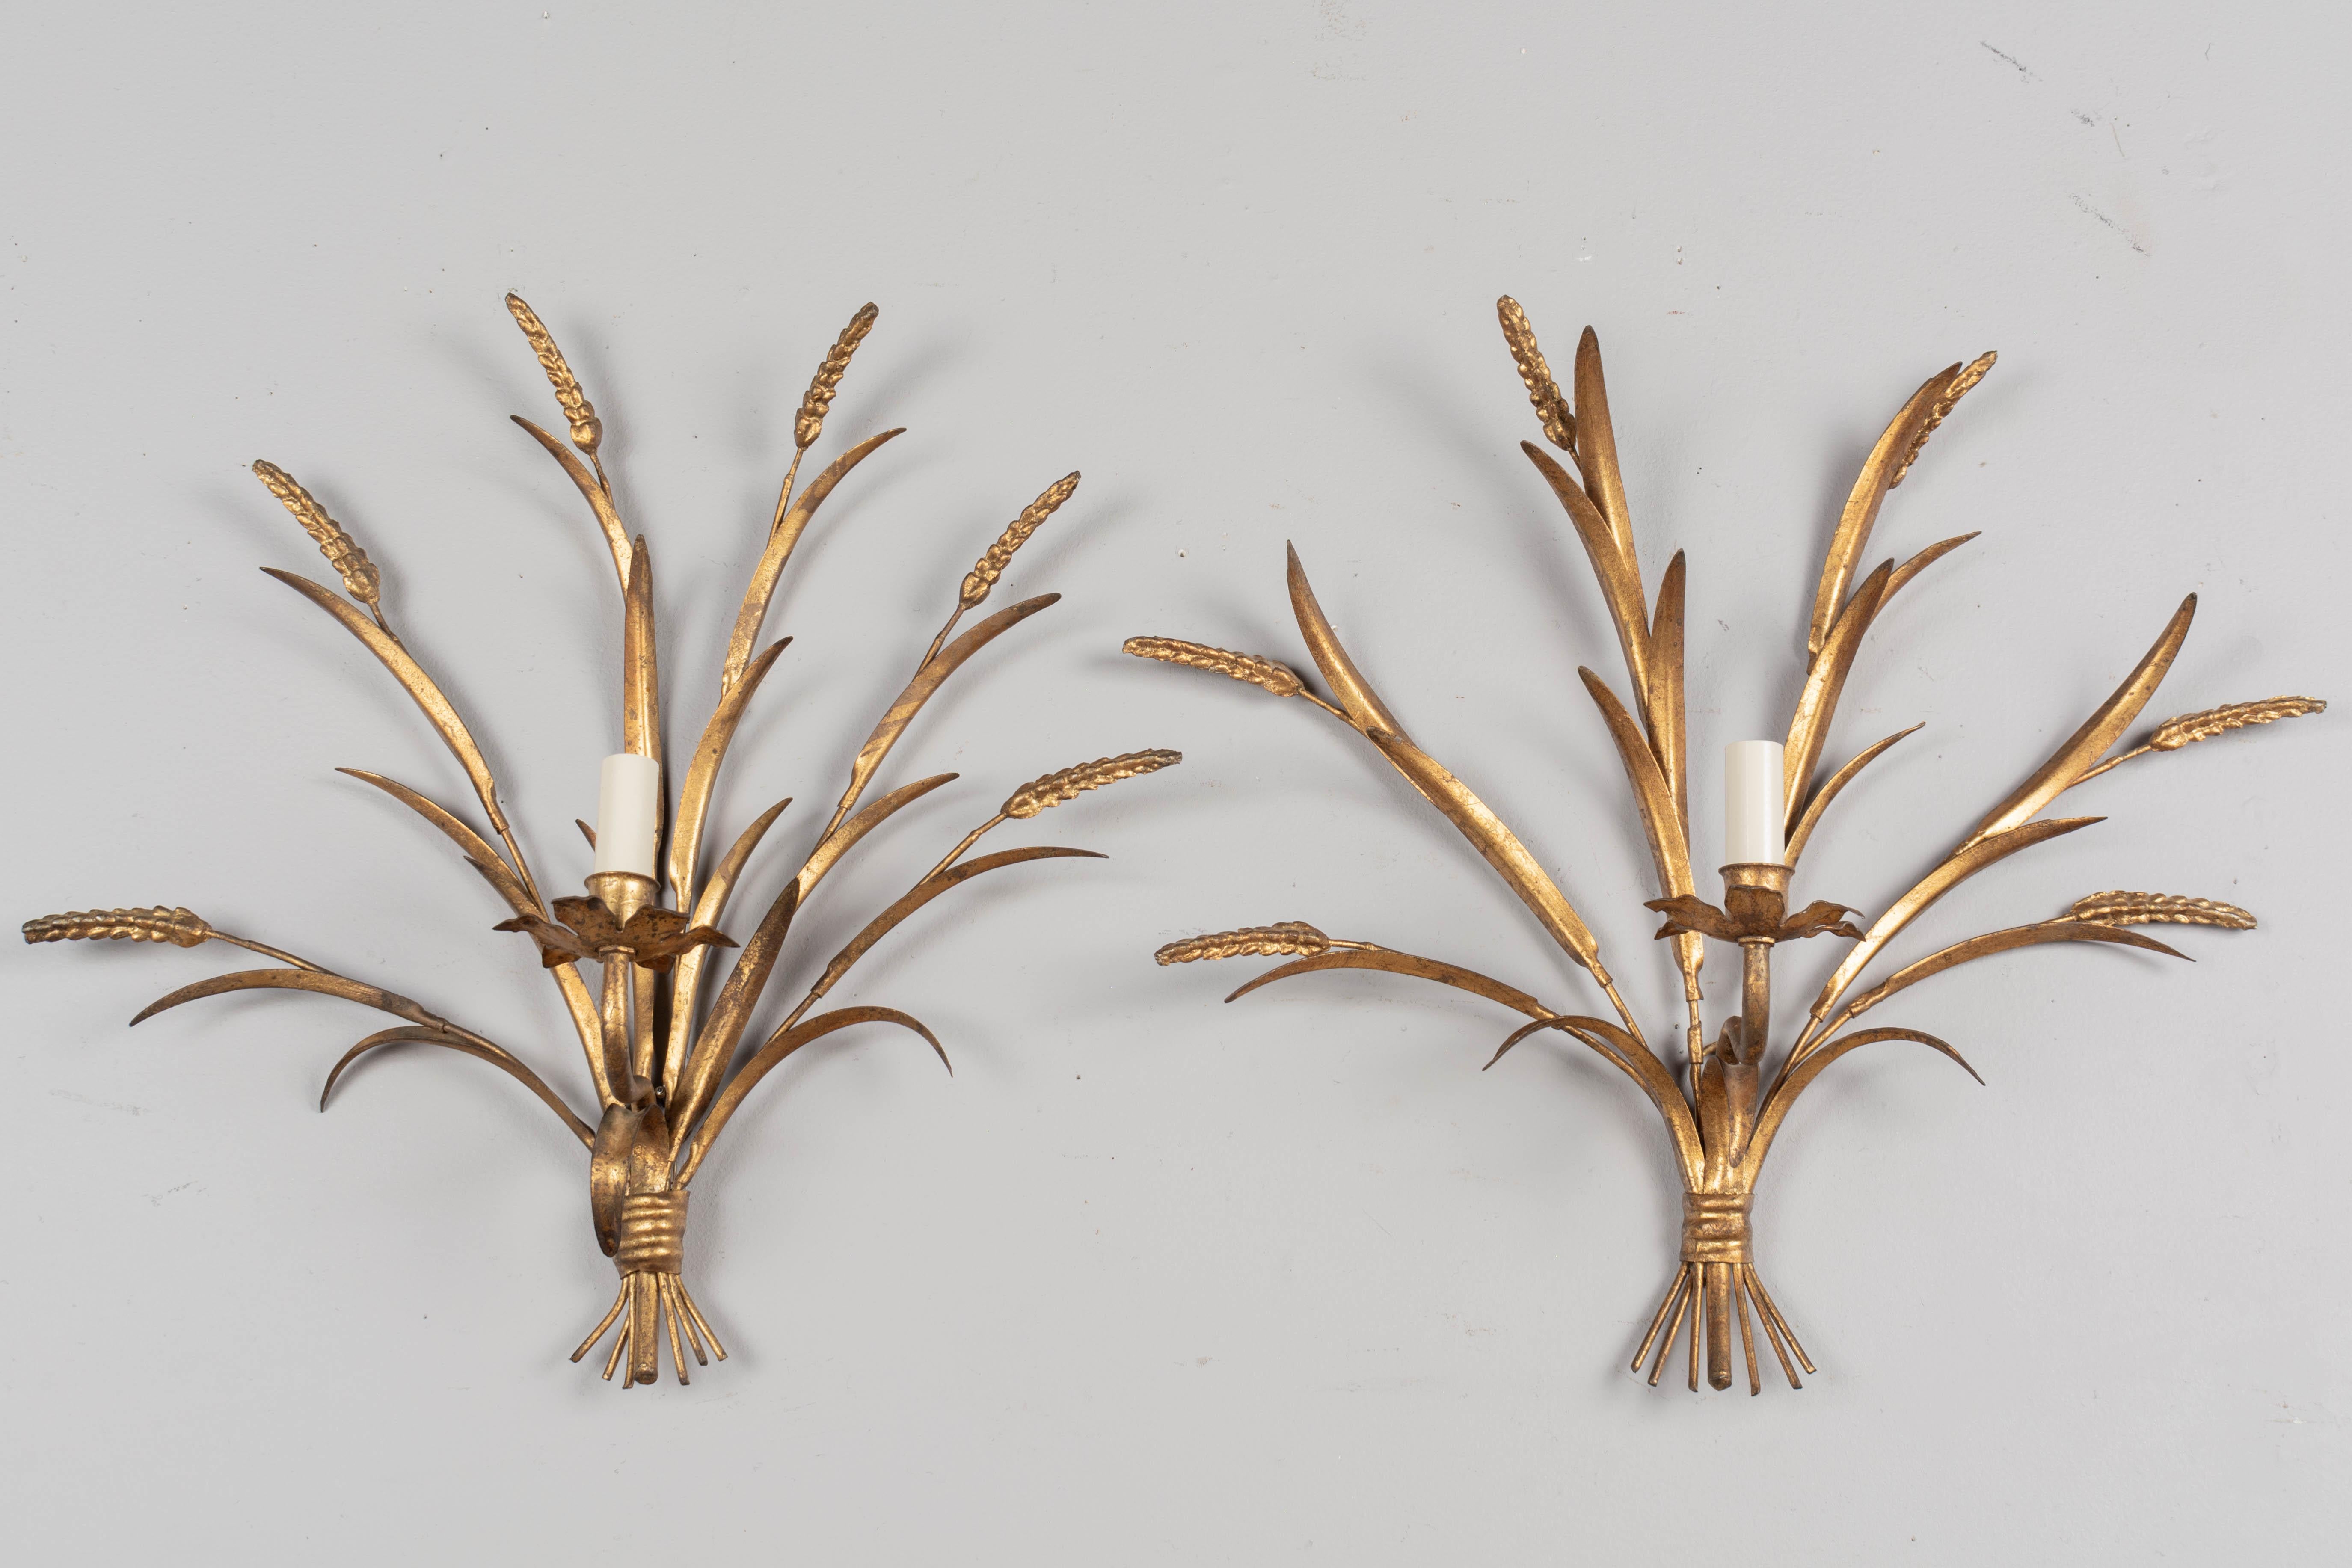 A pair of Hollywood Regency style gilt metal sconces with tôle leaves and wheat stems. Designed by Hans Kögl and made in Italy. New sockets and candle covers. Wired and in working order. Circa 1960-1970. 
Dimensions: 19